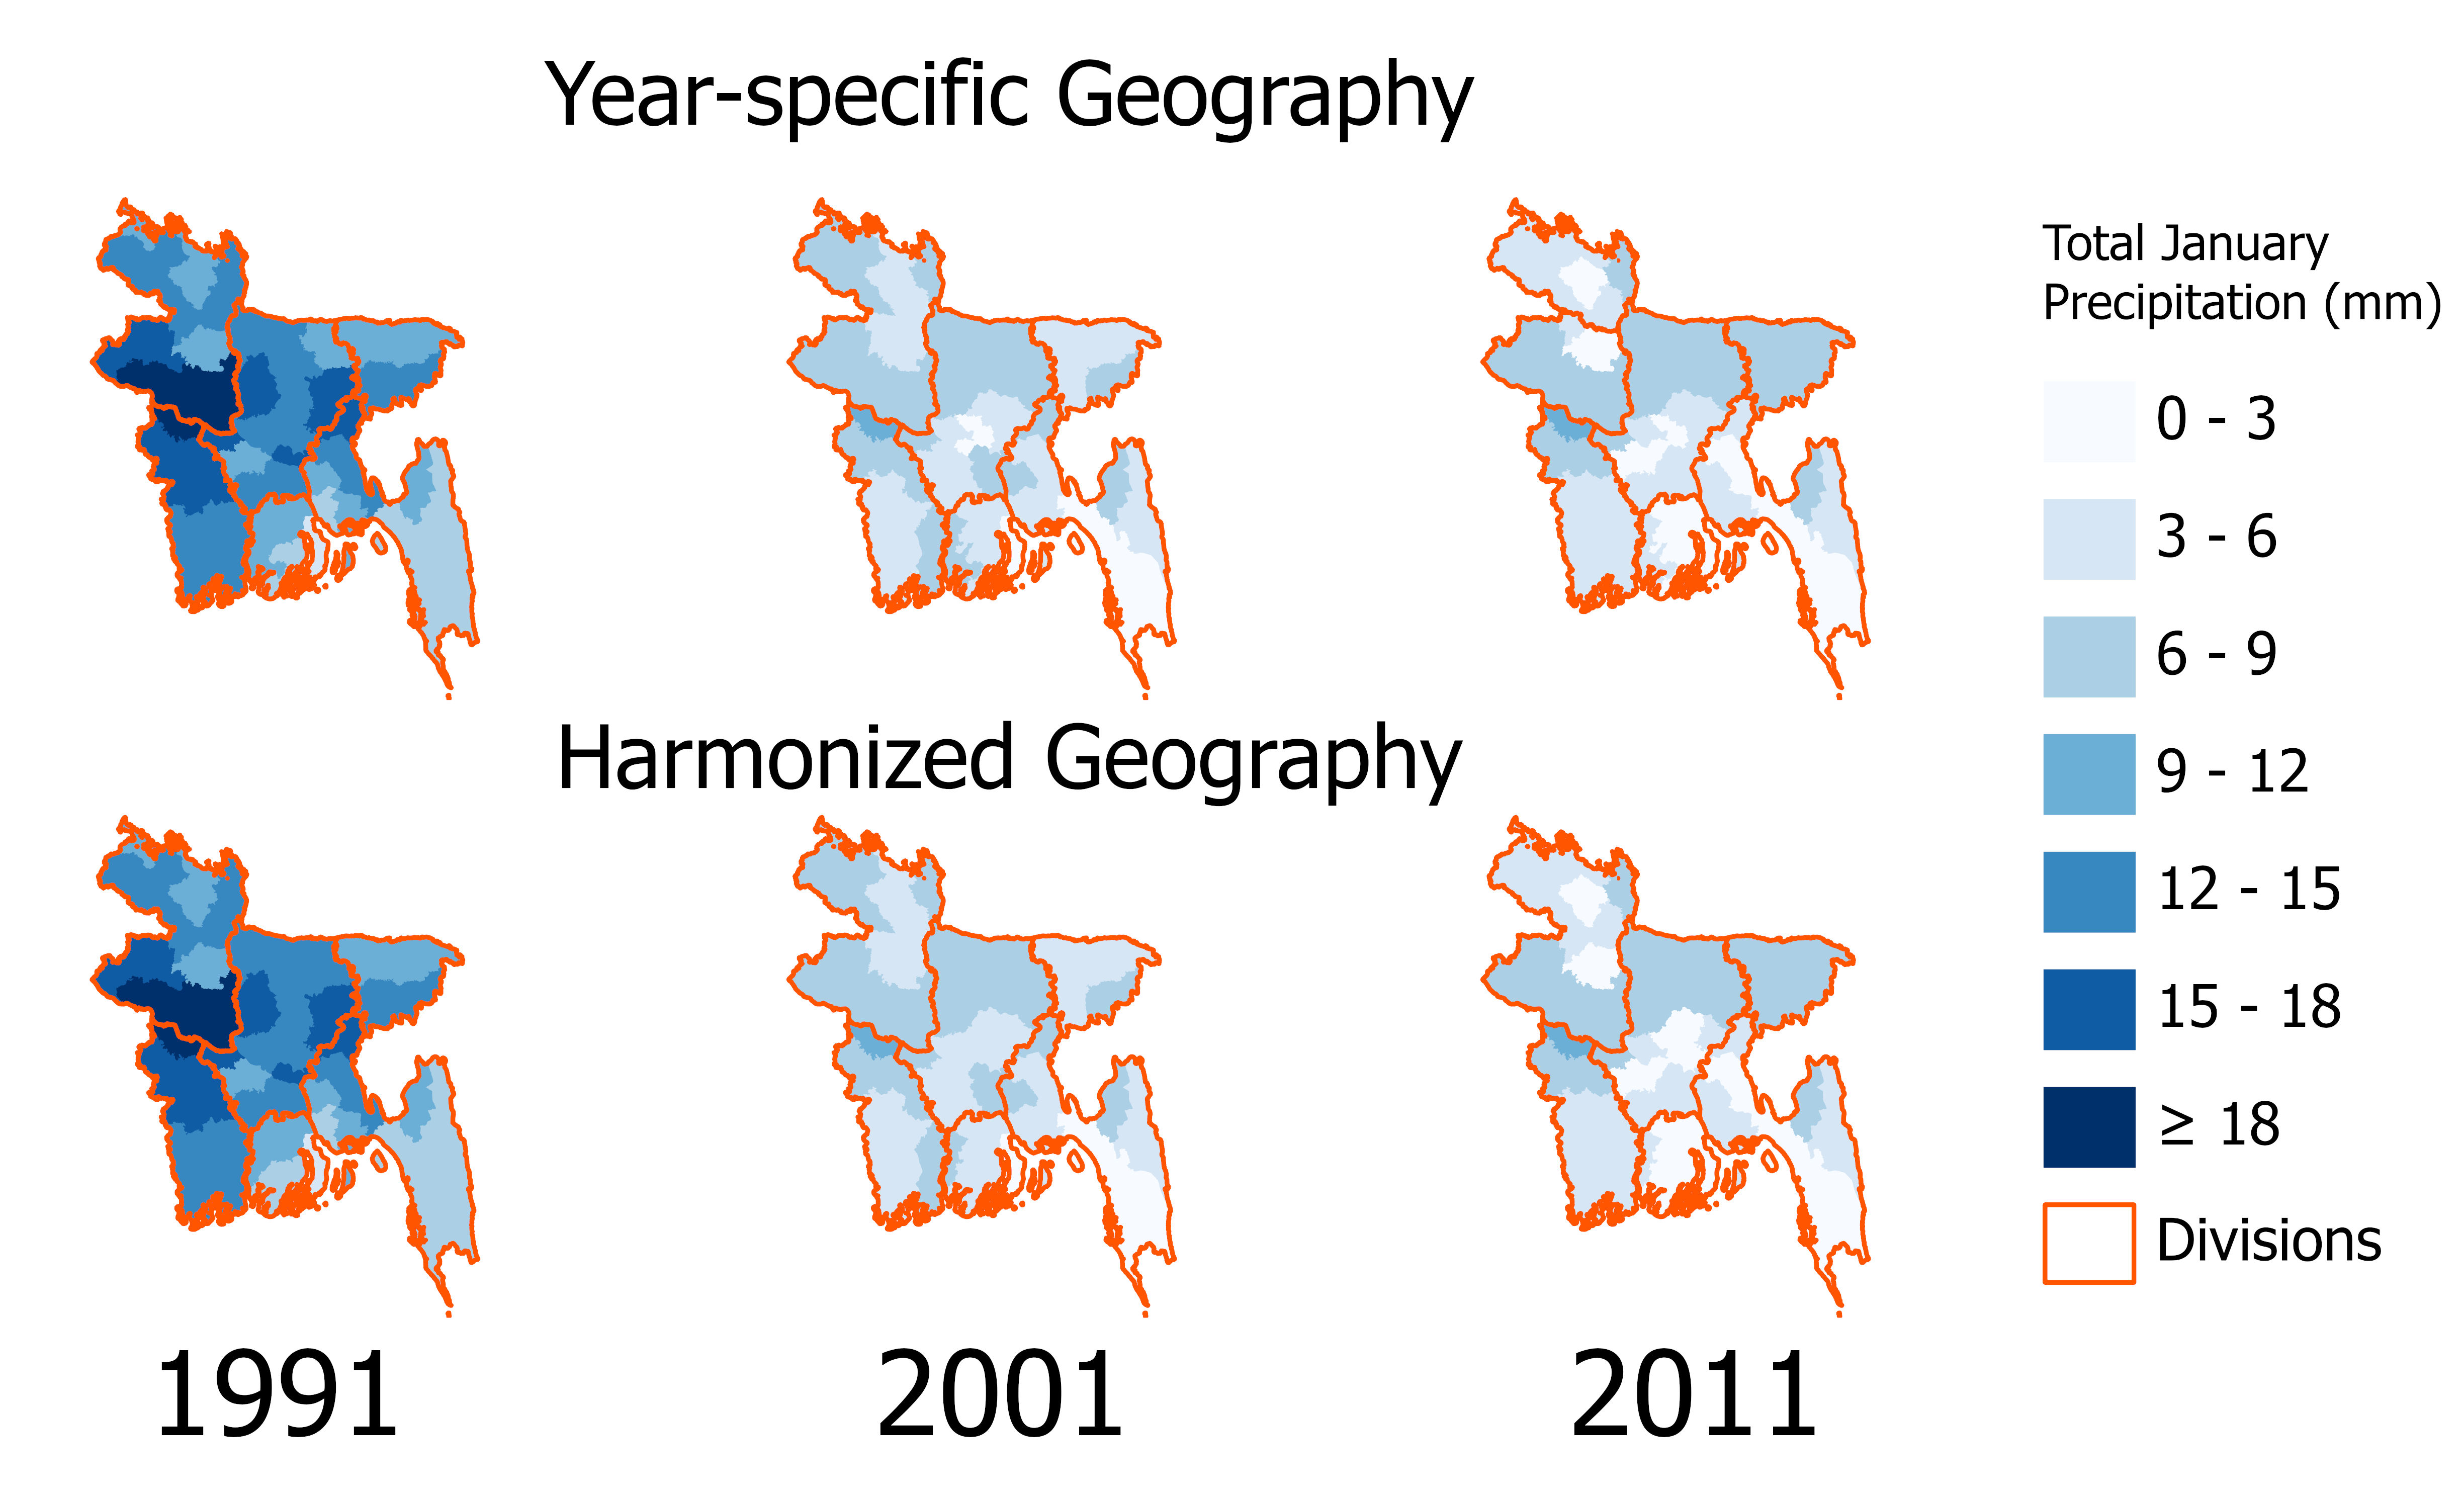 Map showing total January precipitation in Bangladesh, 1991 to 2011